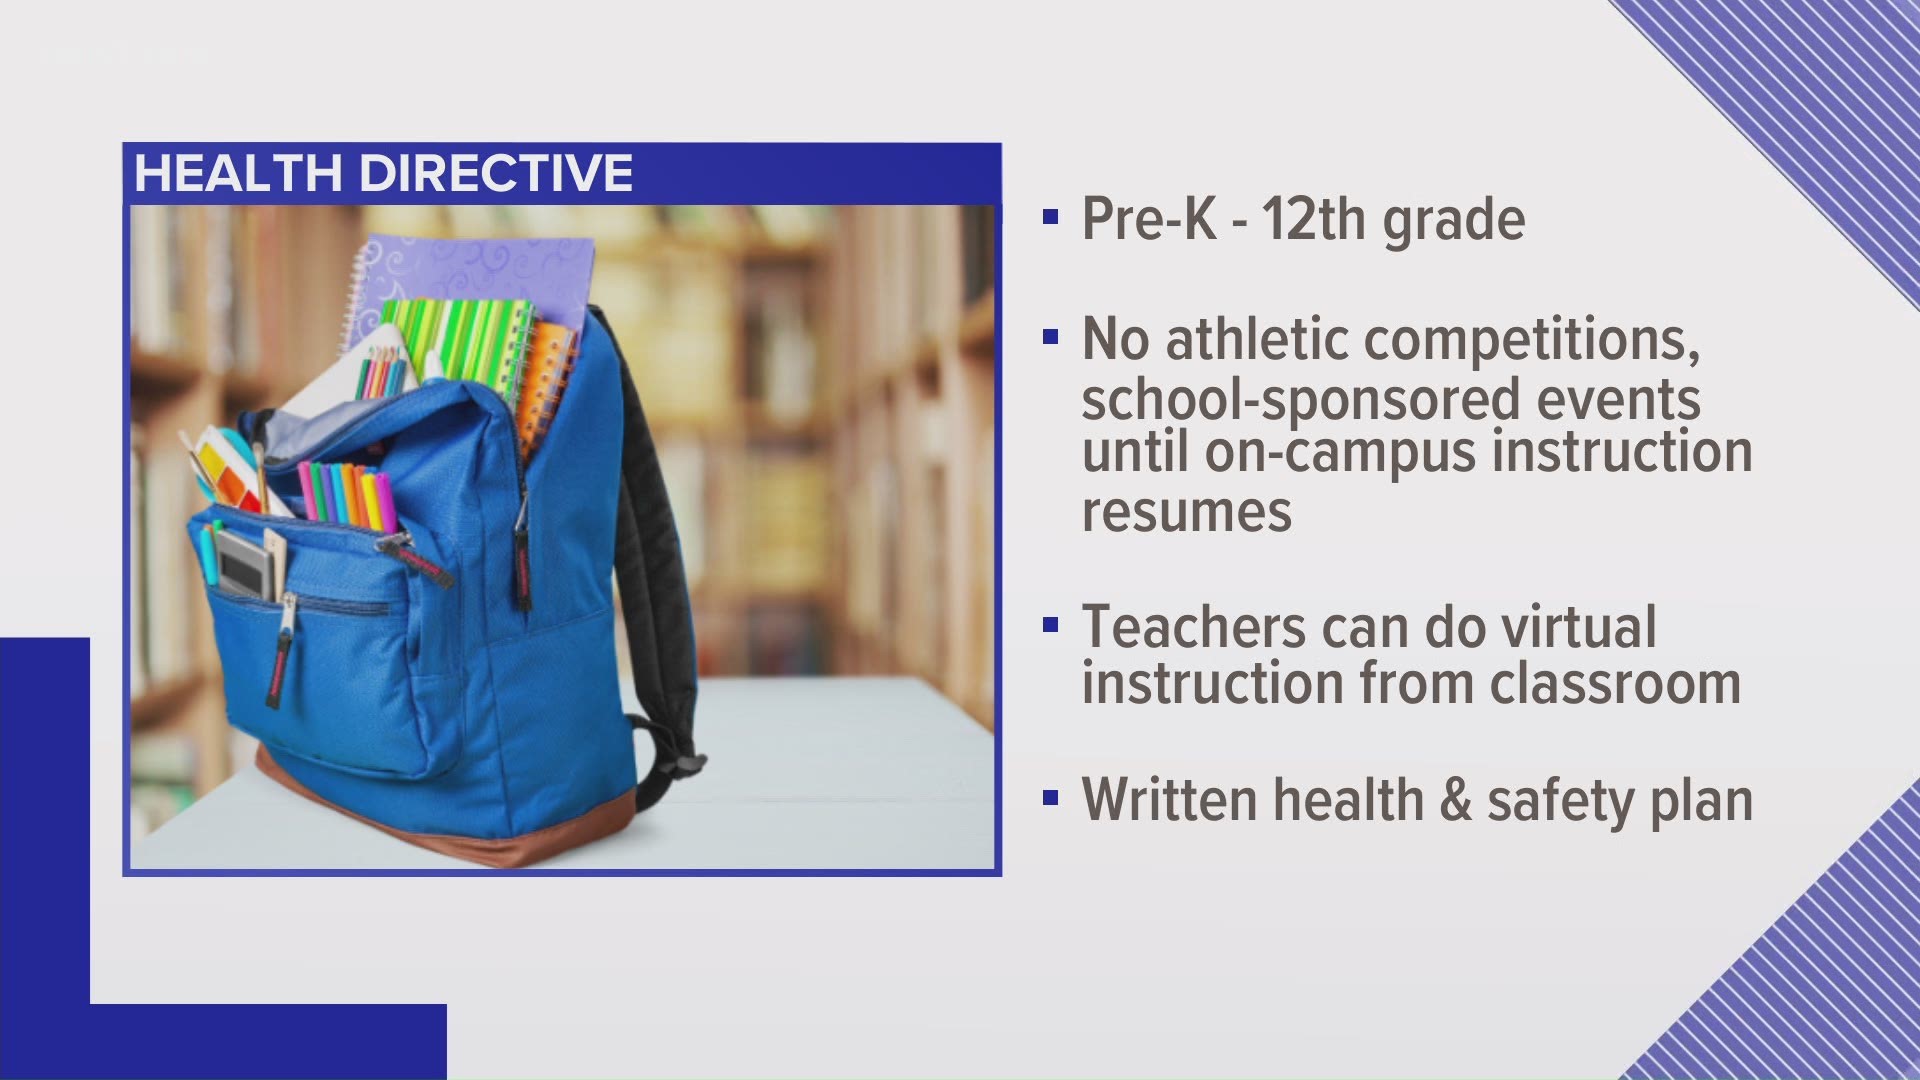 The directive applies to in-person activities both on and off campuses.